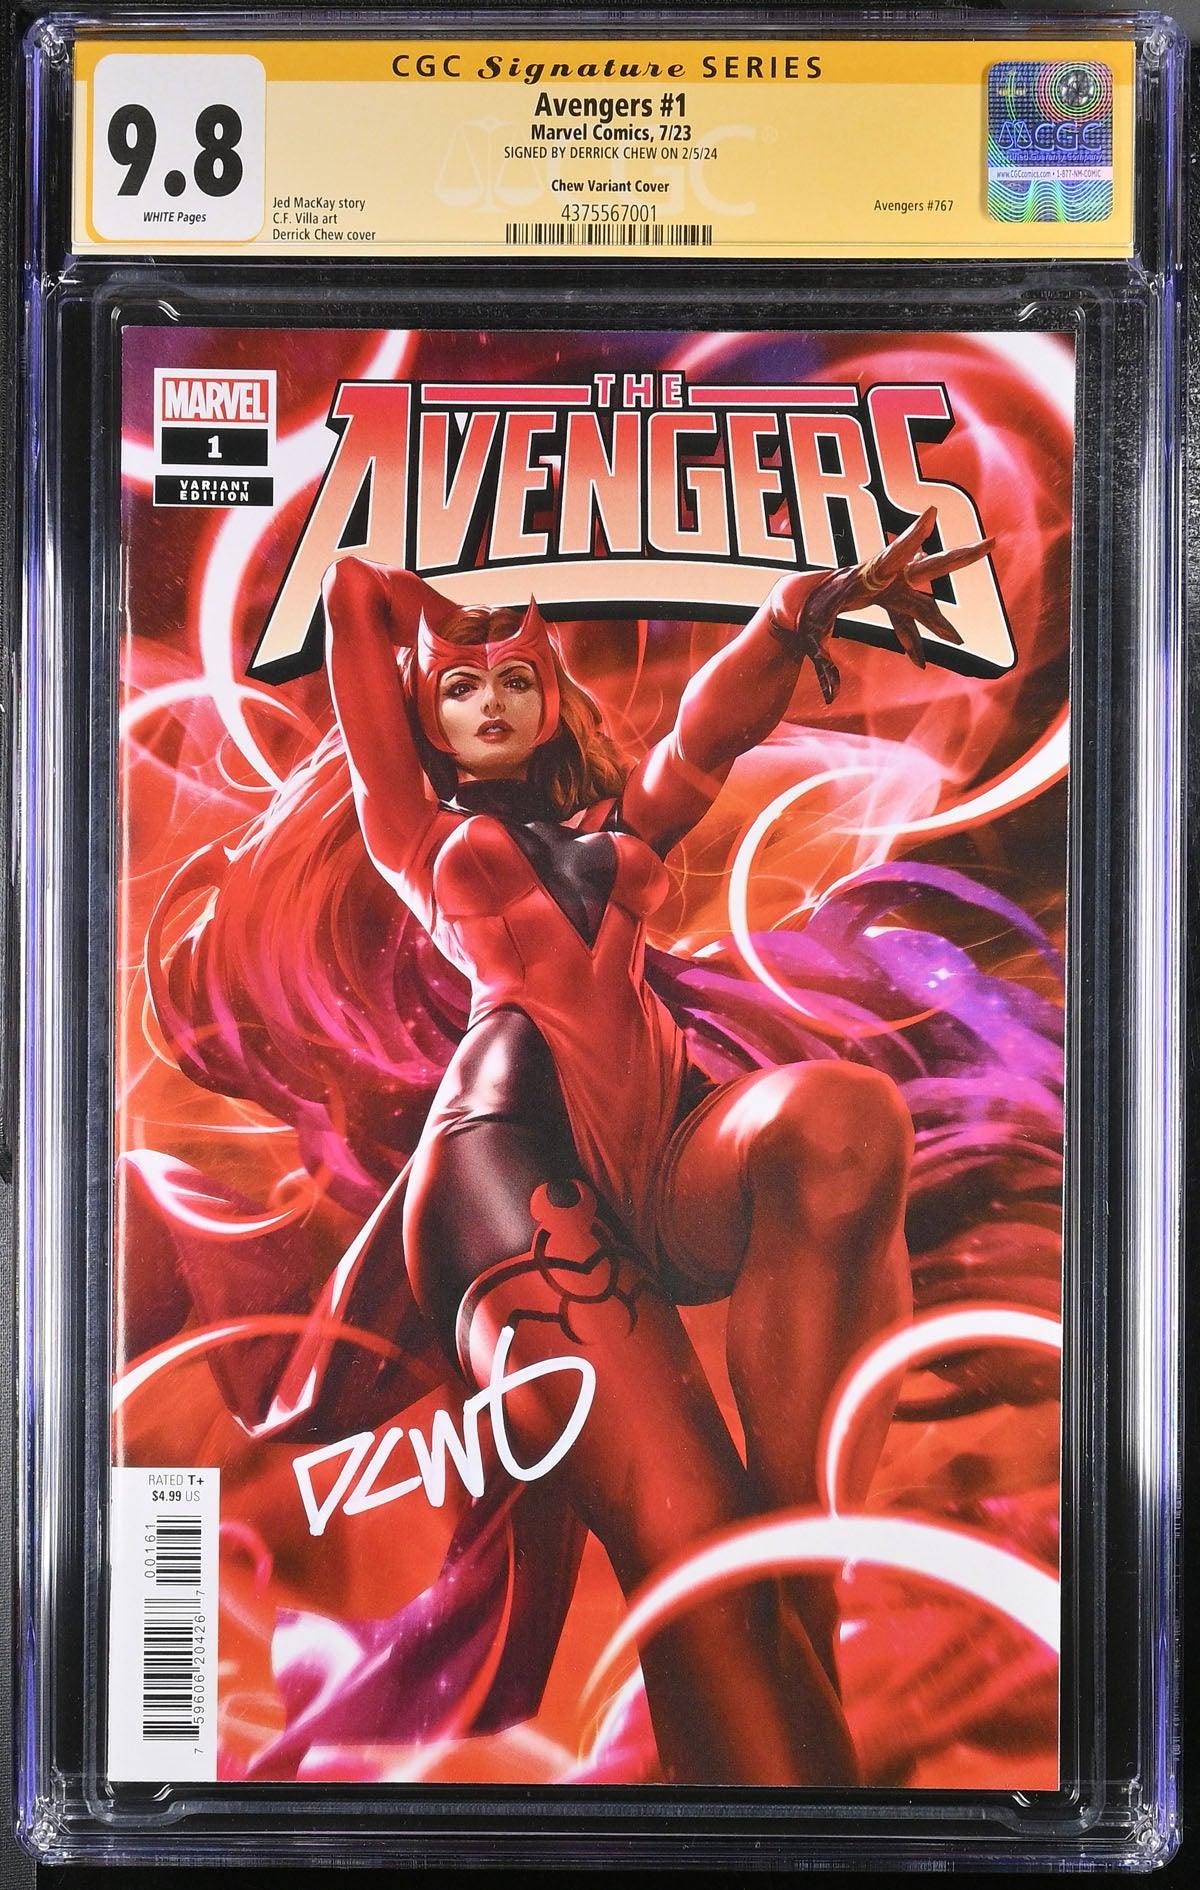 CGC AVENGERS VOL 8 #1 CHEW VARIANT (9.8) SIGNATURE SERIES - SIGNED BY DERRICK CHEW - Kings Comics